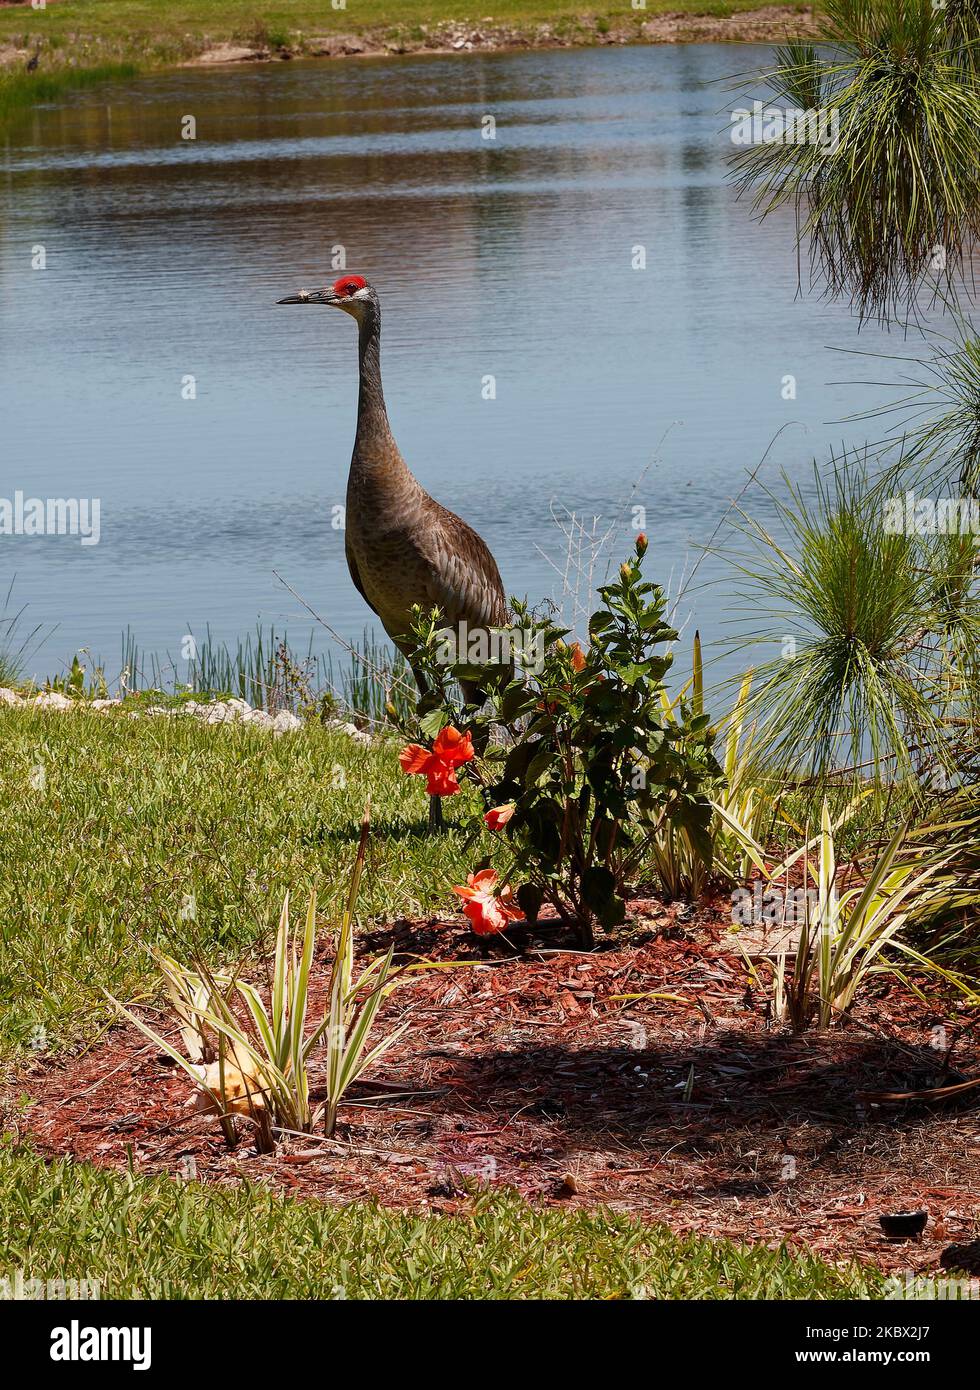 Sandhill Crane, standing in grass, backyard, pond, shrubs, very large bird, Grus canadensis, red forehead, tufted rump feathers, long neck, long legs, Stock Photo